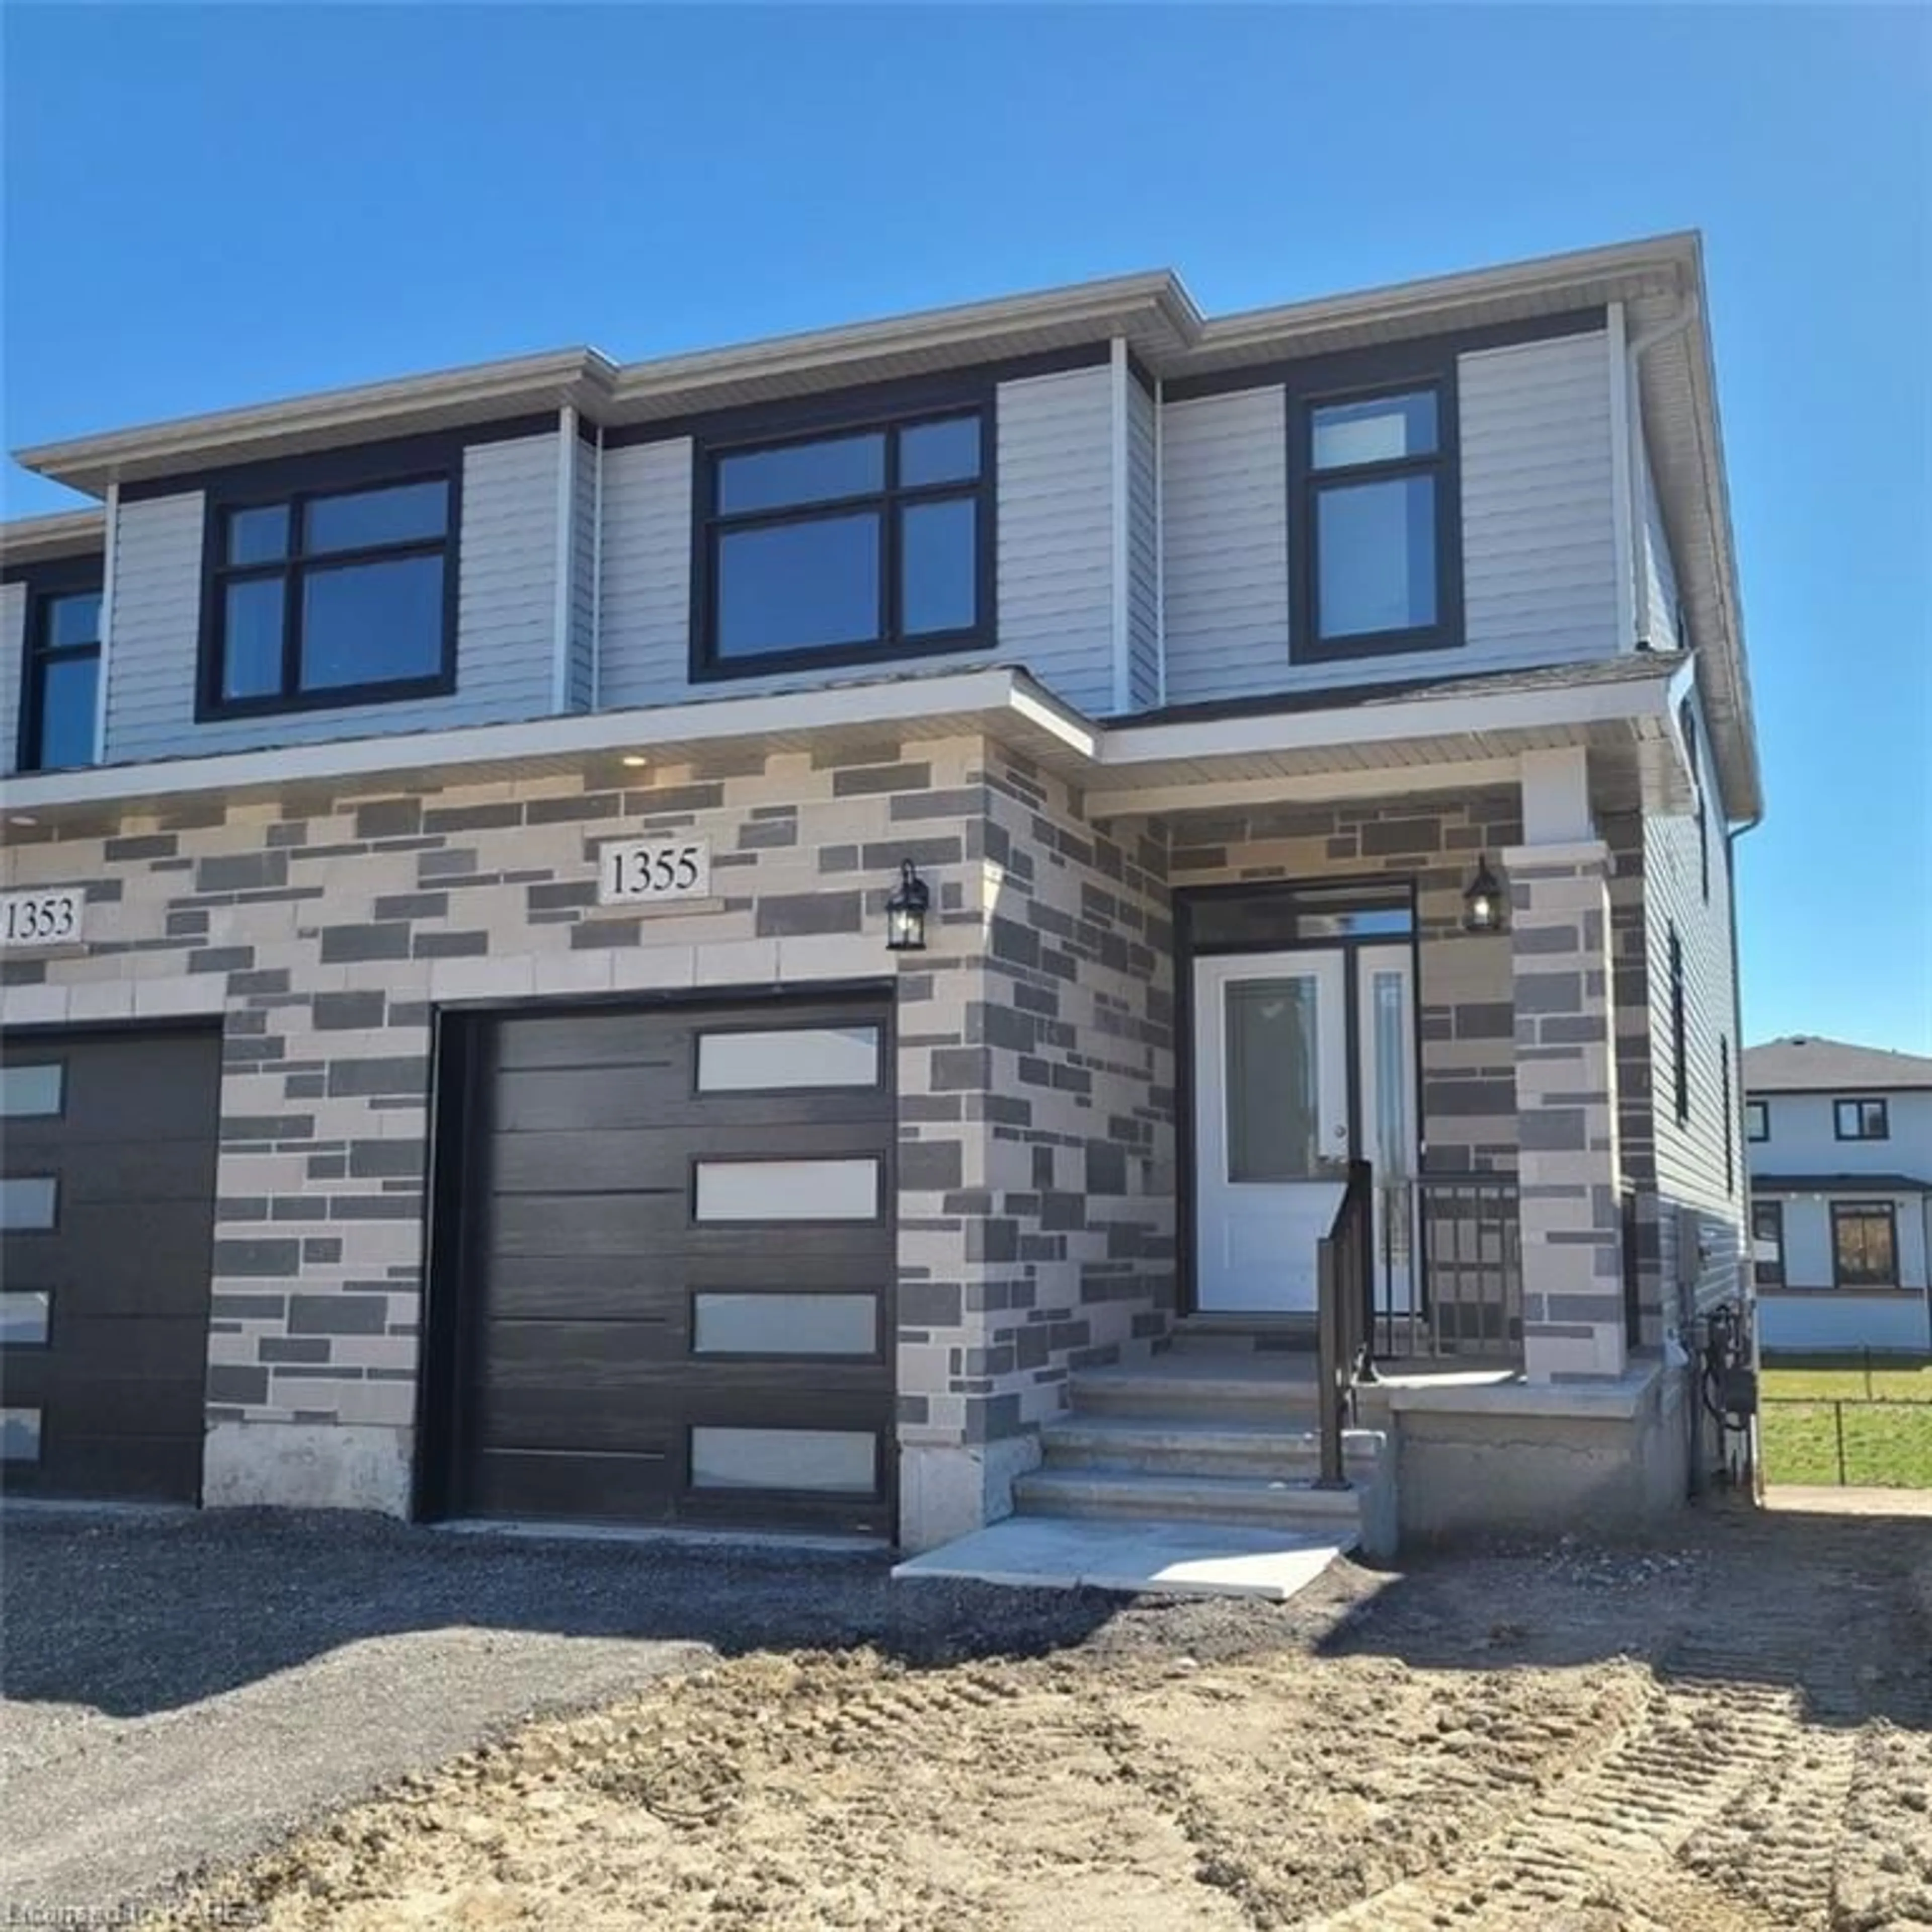 Home with brick exterior material for 1355 Woodfield (Lot E11) Cres, Kingston Ontario K7P 0T3